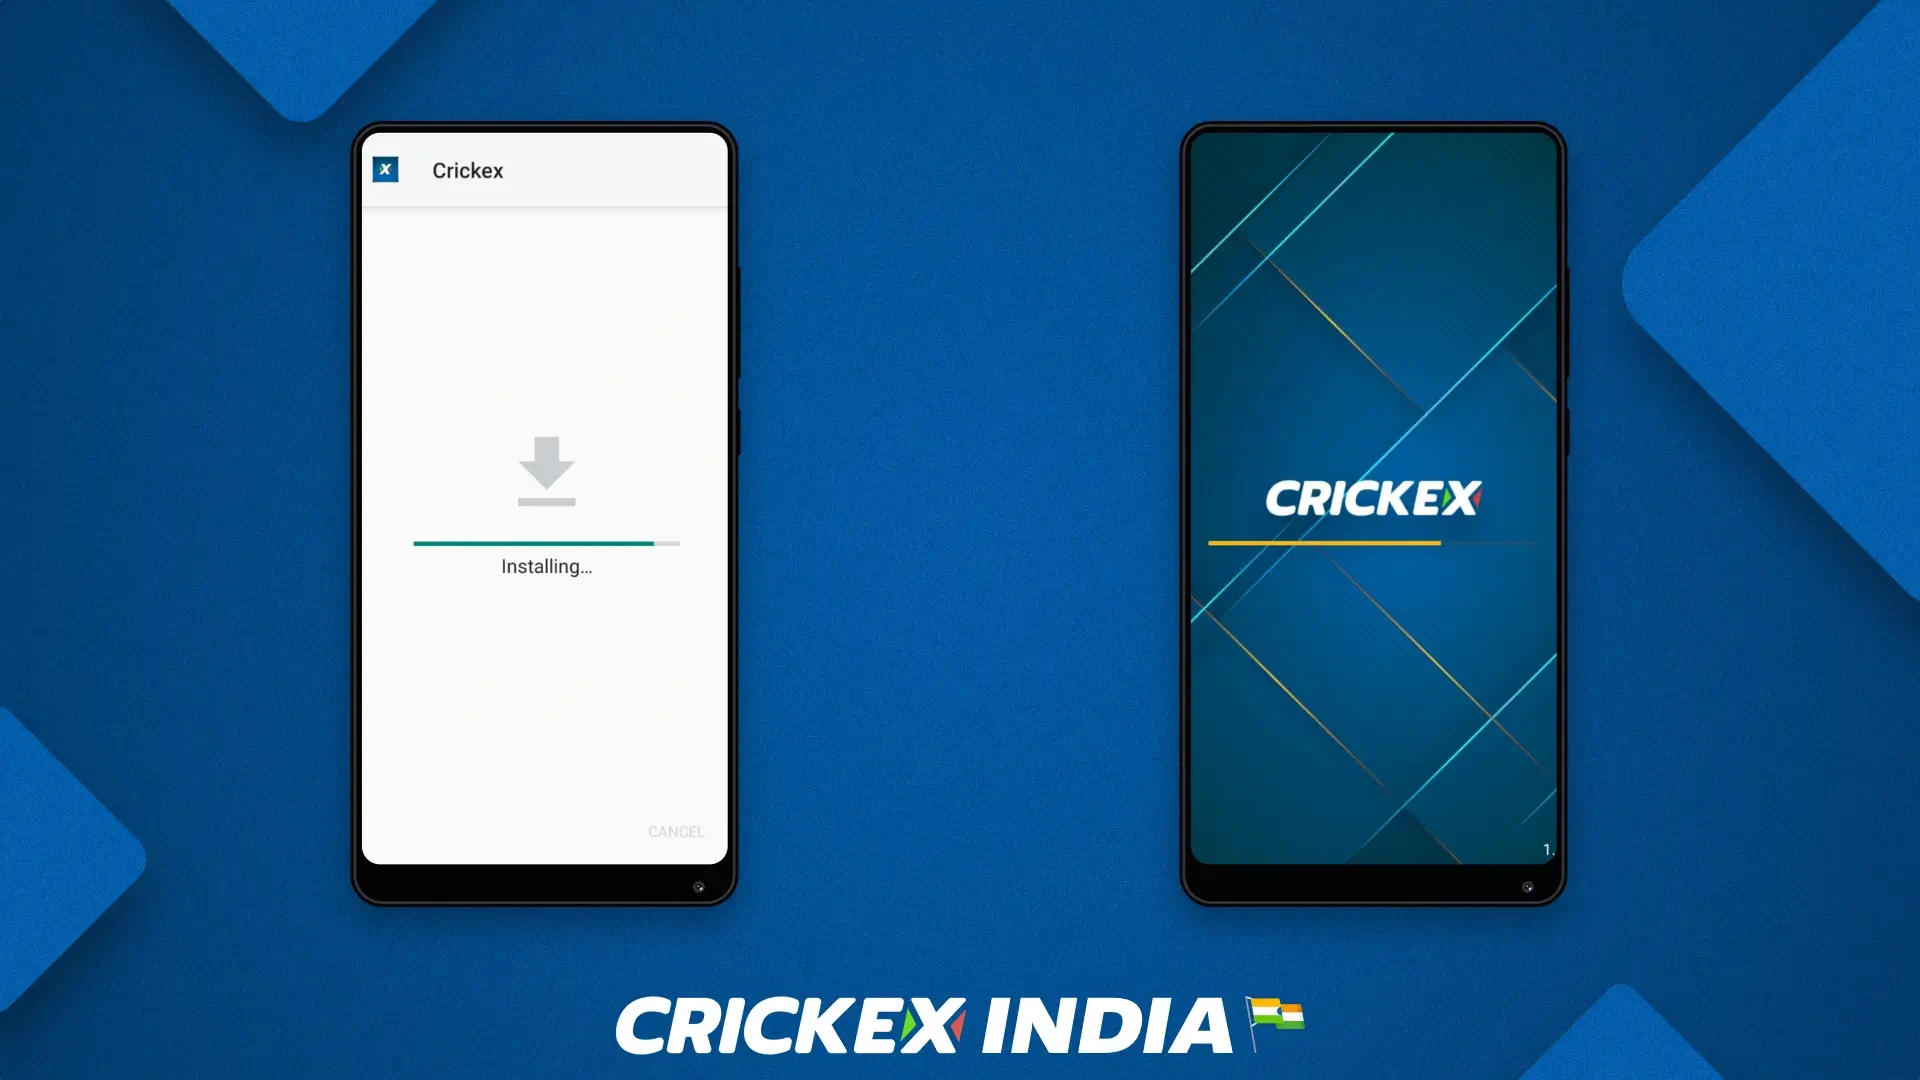 How to install the crickex app on android smartphone or tablet